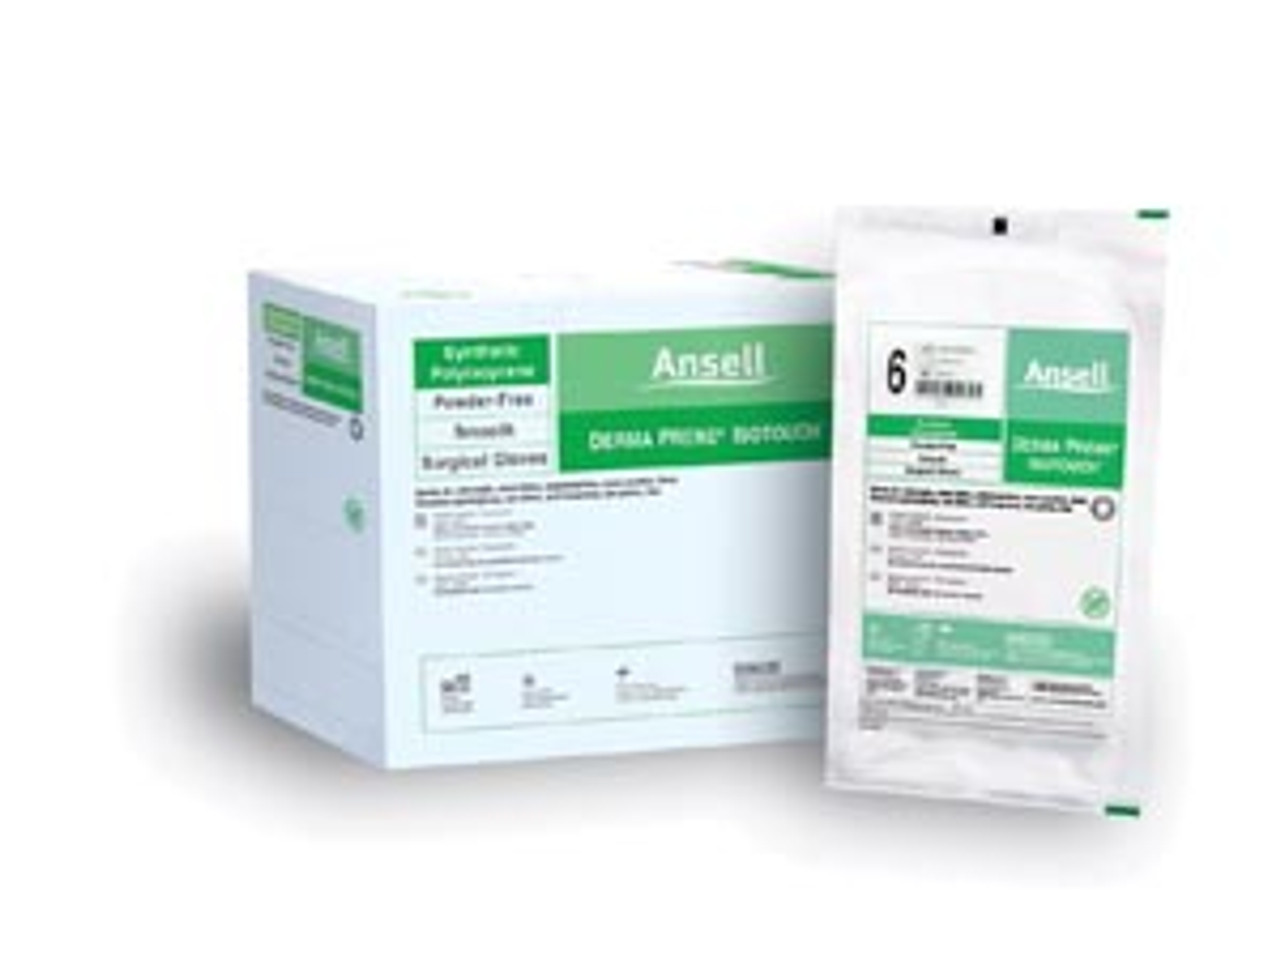 Ansell Gammex Non-Latex PI Surgical Gloves 100% Synthetic Polyisoprene, No Natural Rubber, Sterile, PF, Surgical, Size 8Â½, 50 pr/bx